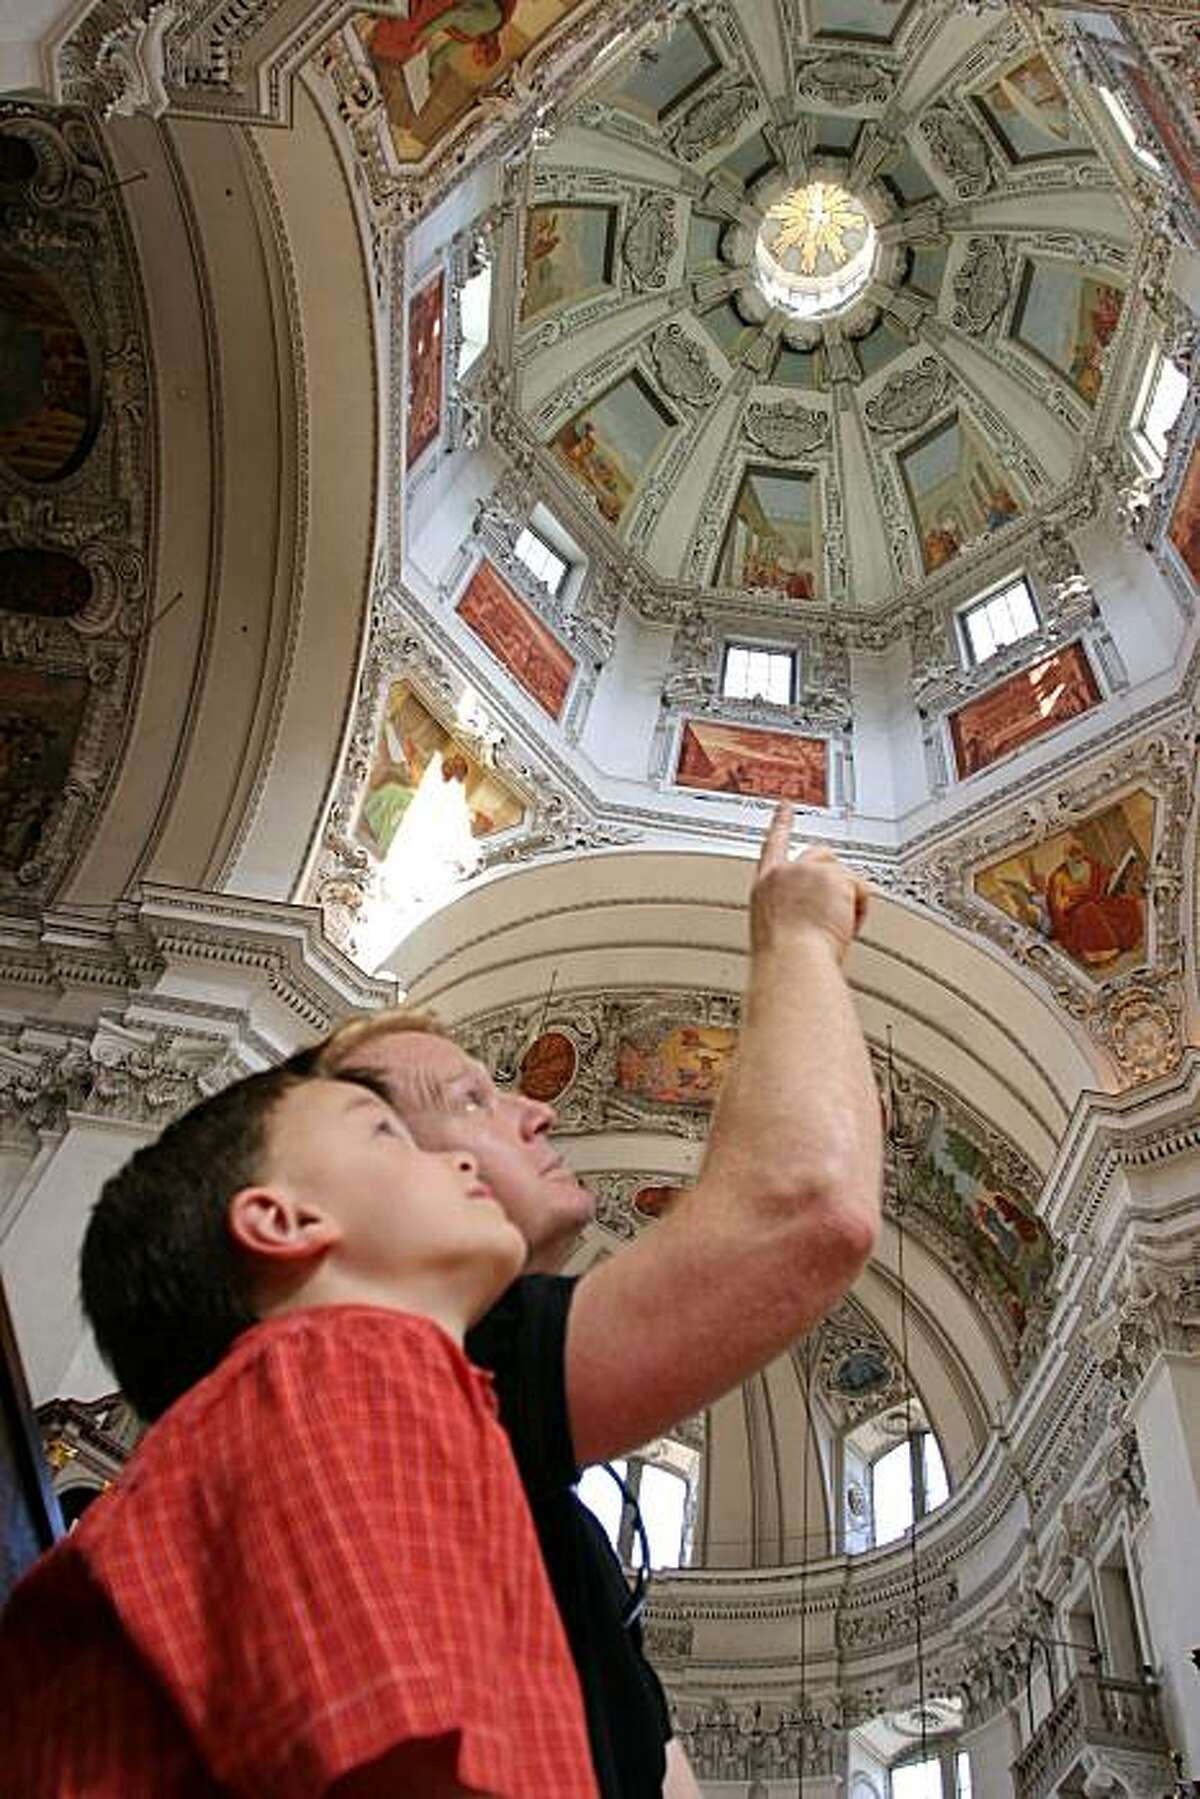 A father and his son gaze at the Salzburg Cathedral dome which has ceiling paintings depicting the life of Christ.